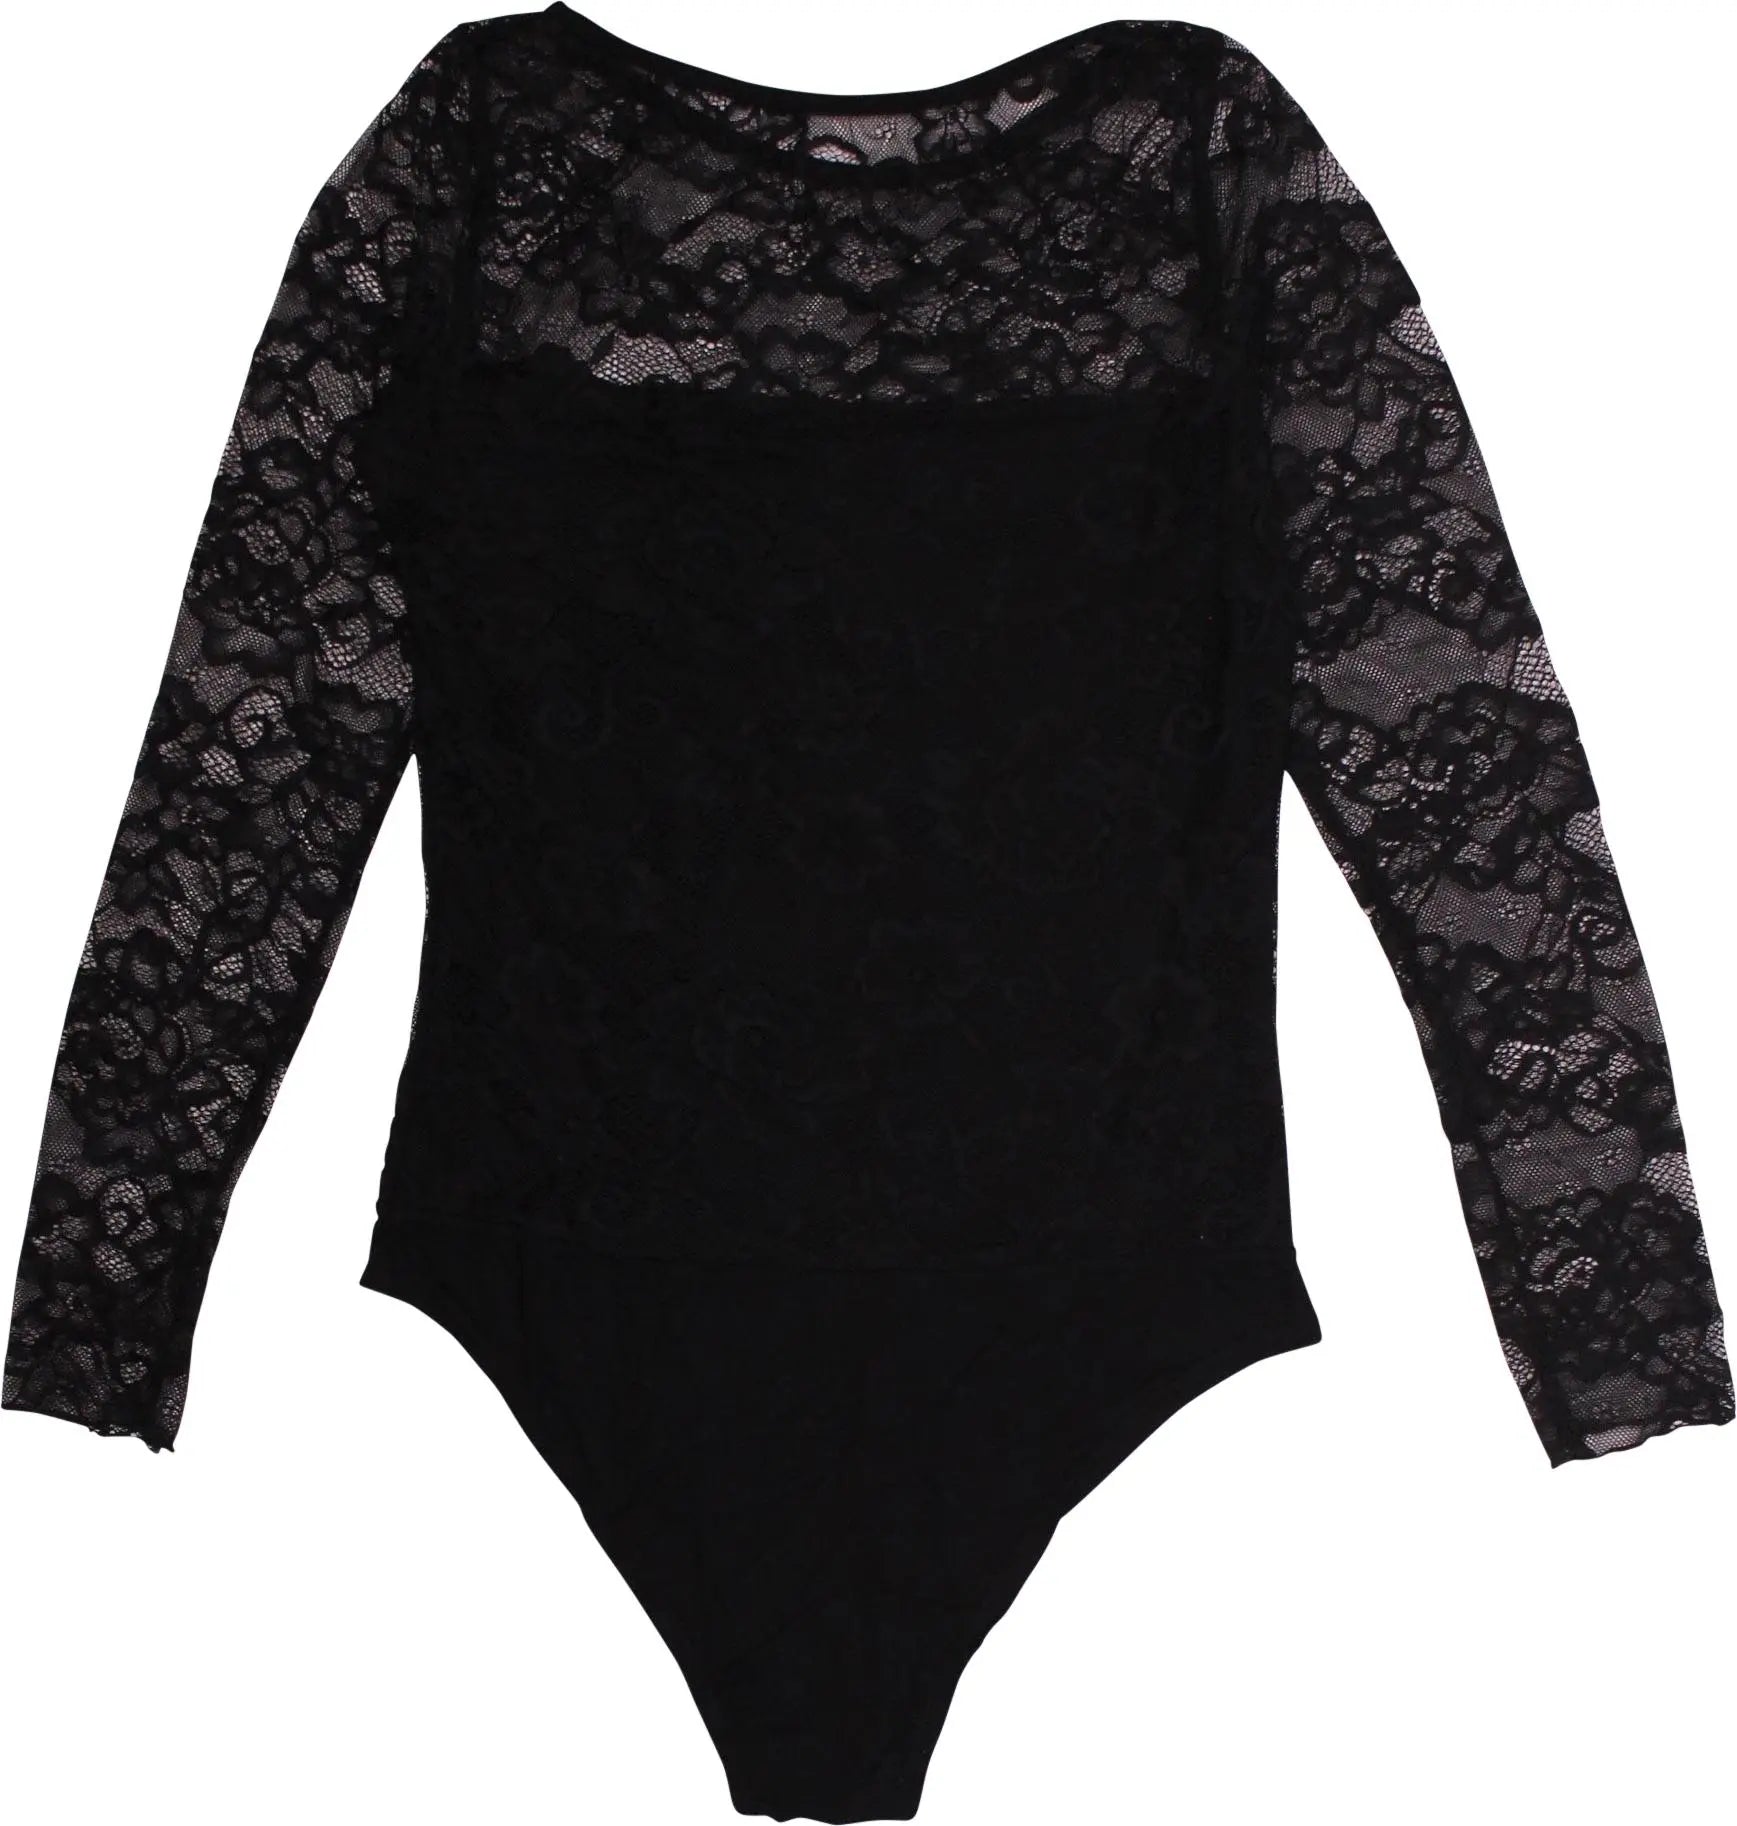 Unknown - Black Lace Body- ThriftTale.com - Vintage and second handclothing